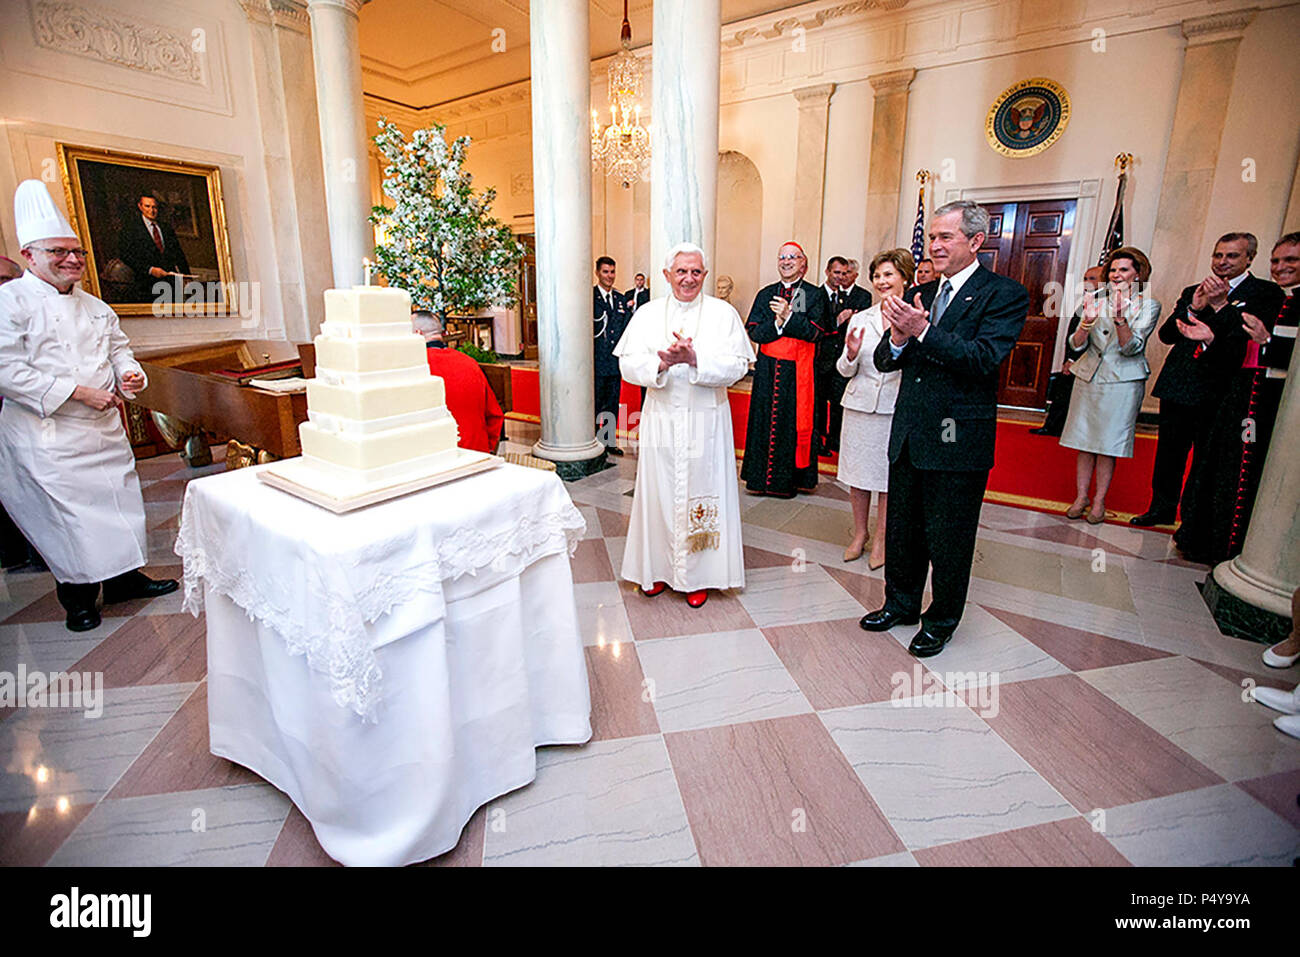 President George W. Bush and Mrs. Laura Bush lead the celebration of the 81st birthday of Pope Benedict XVI as he's presented a cake by White House Pastry Chef Bill Yosses Wednesday, April 16, 2008, at the White House. Stock Photo